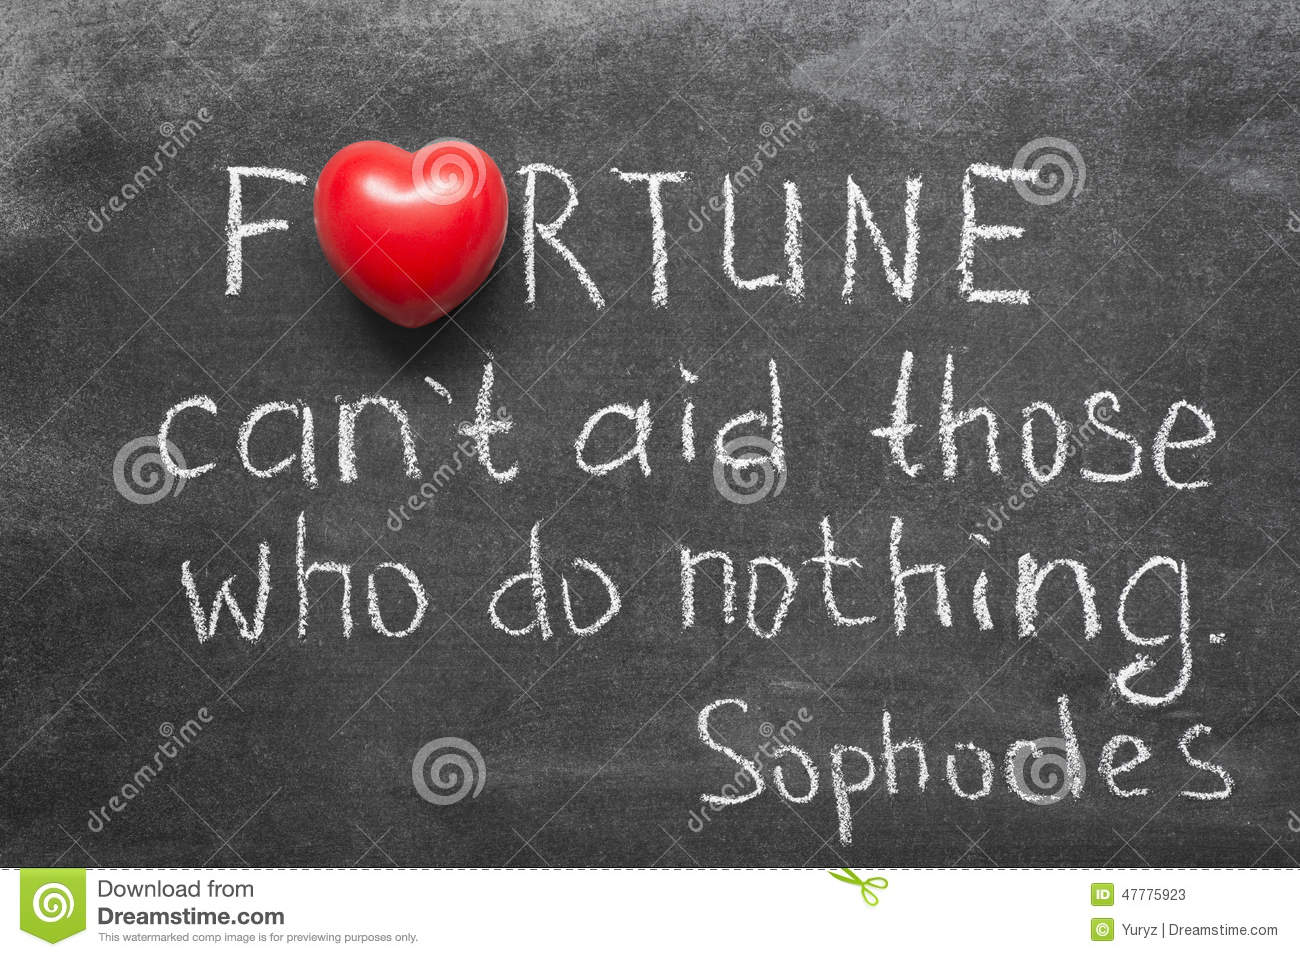 Fortune cannot aid those who do nothing. Sophocles